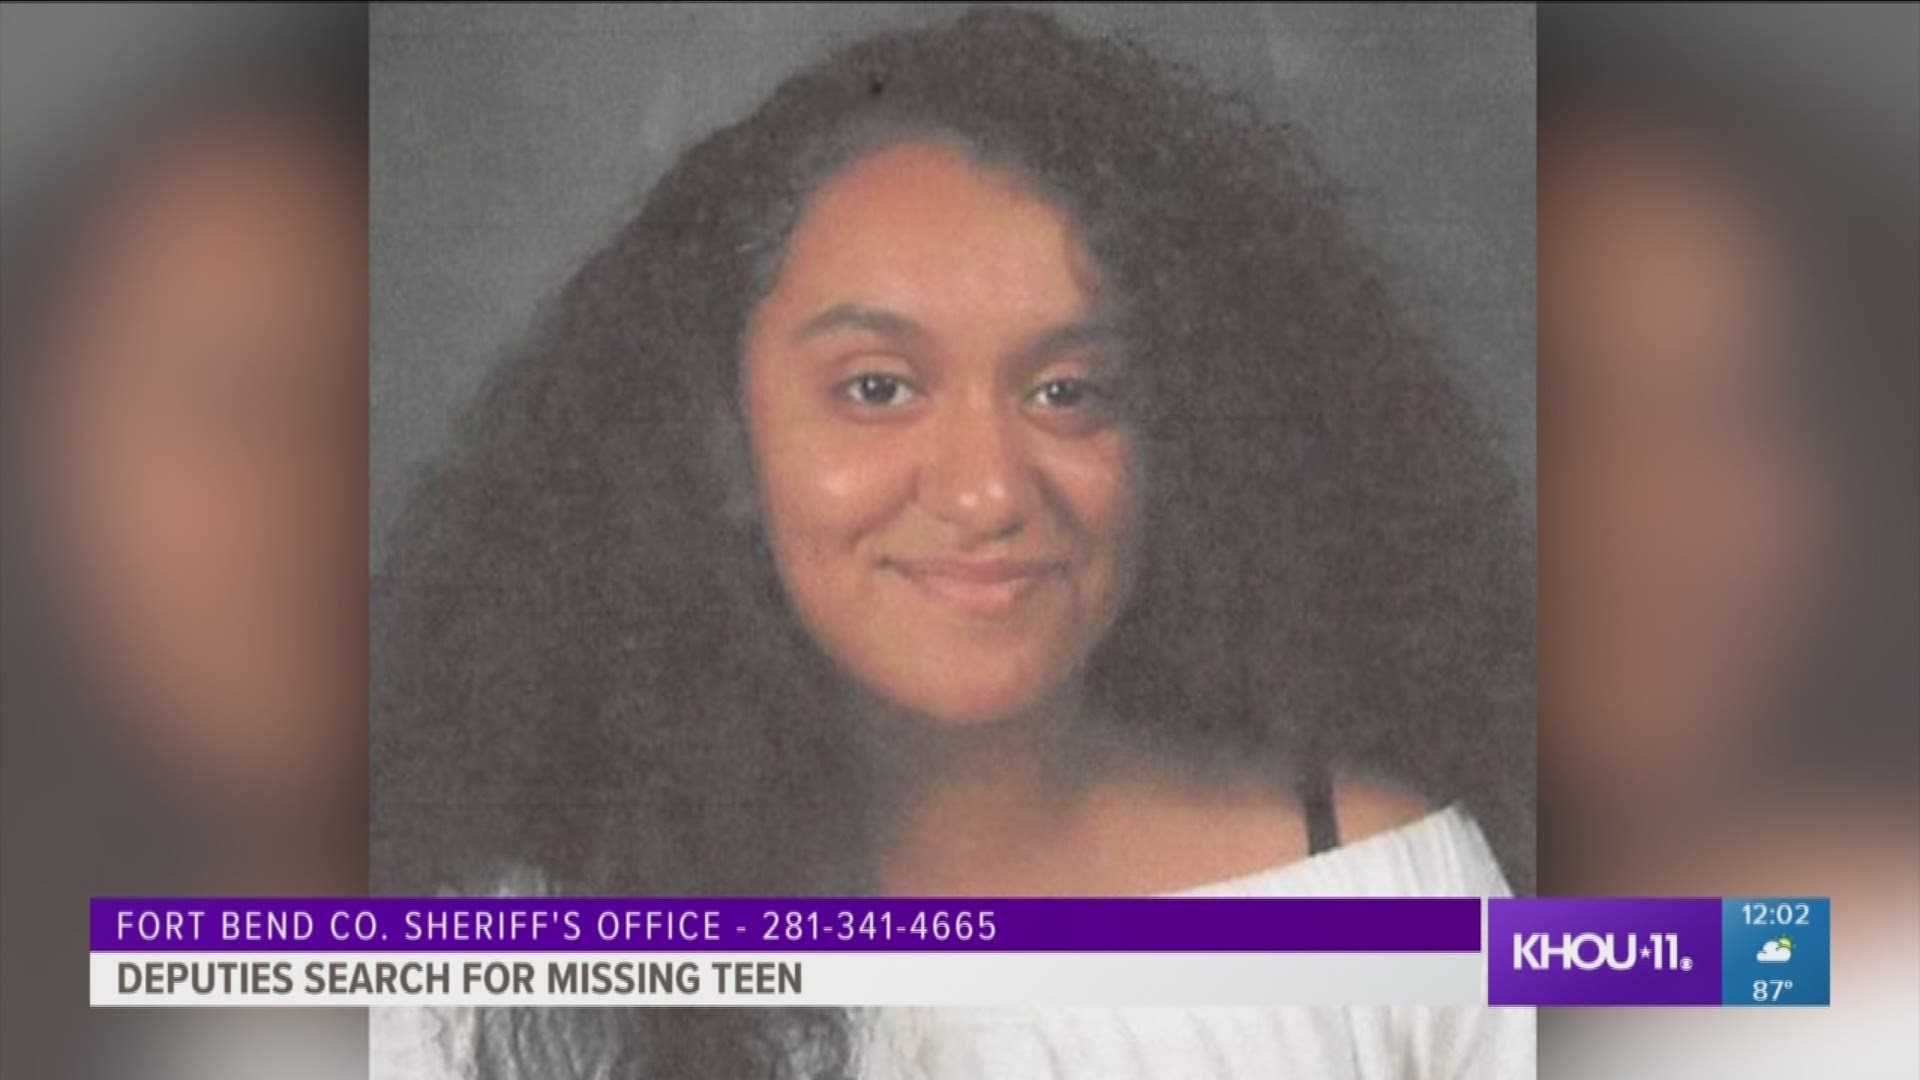 Deputies with the Fort Bend County Sheriff's Office are looking for a missing 14 year old girl who was last seen leaving a party on Telephone Road on Saturday. 